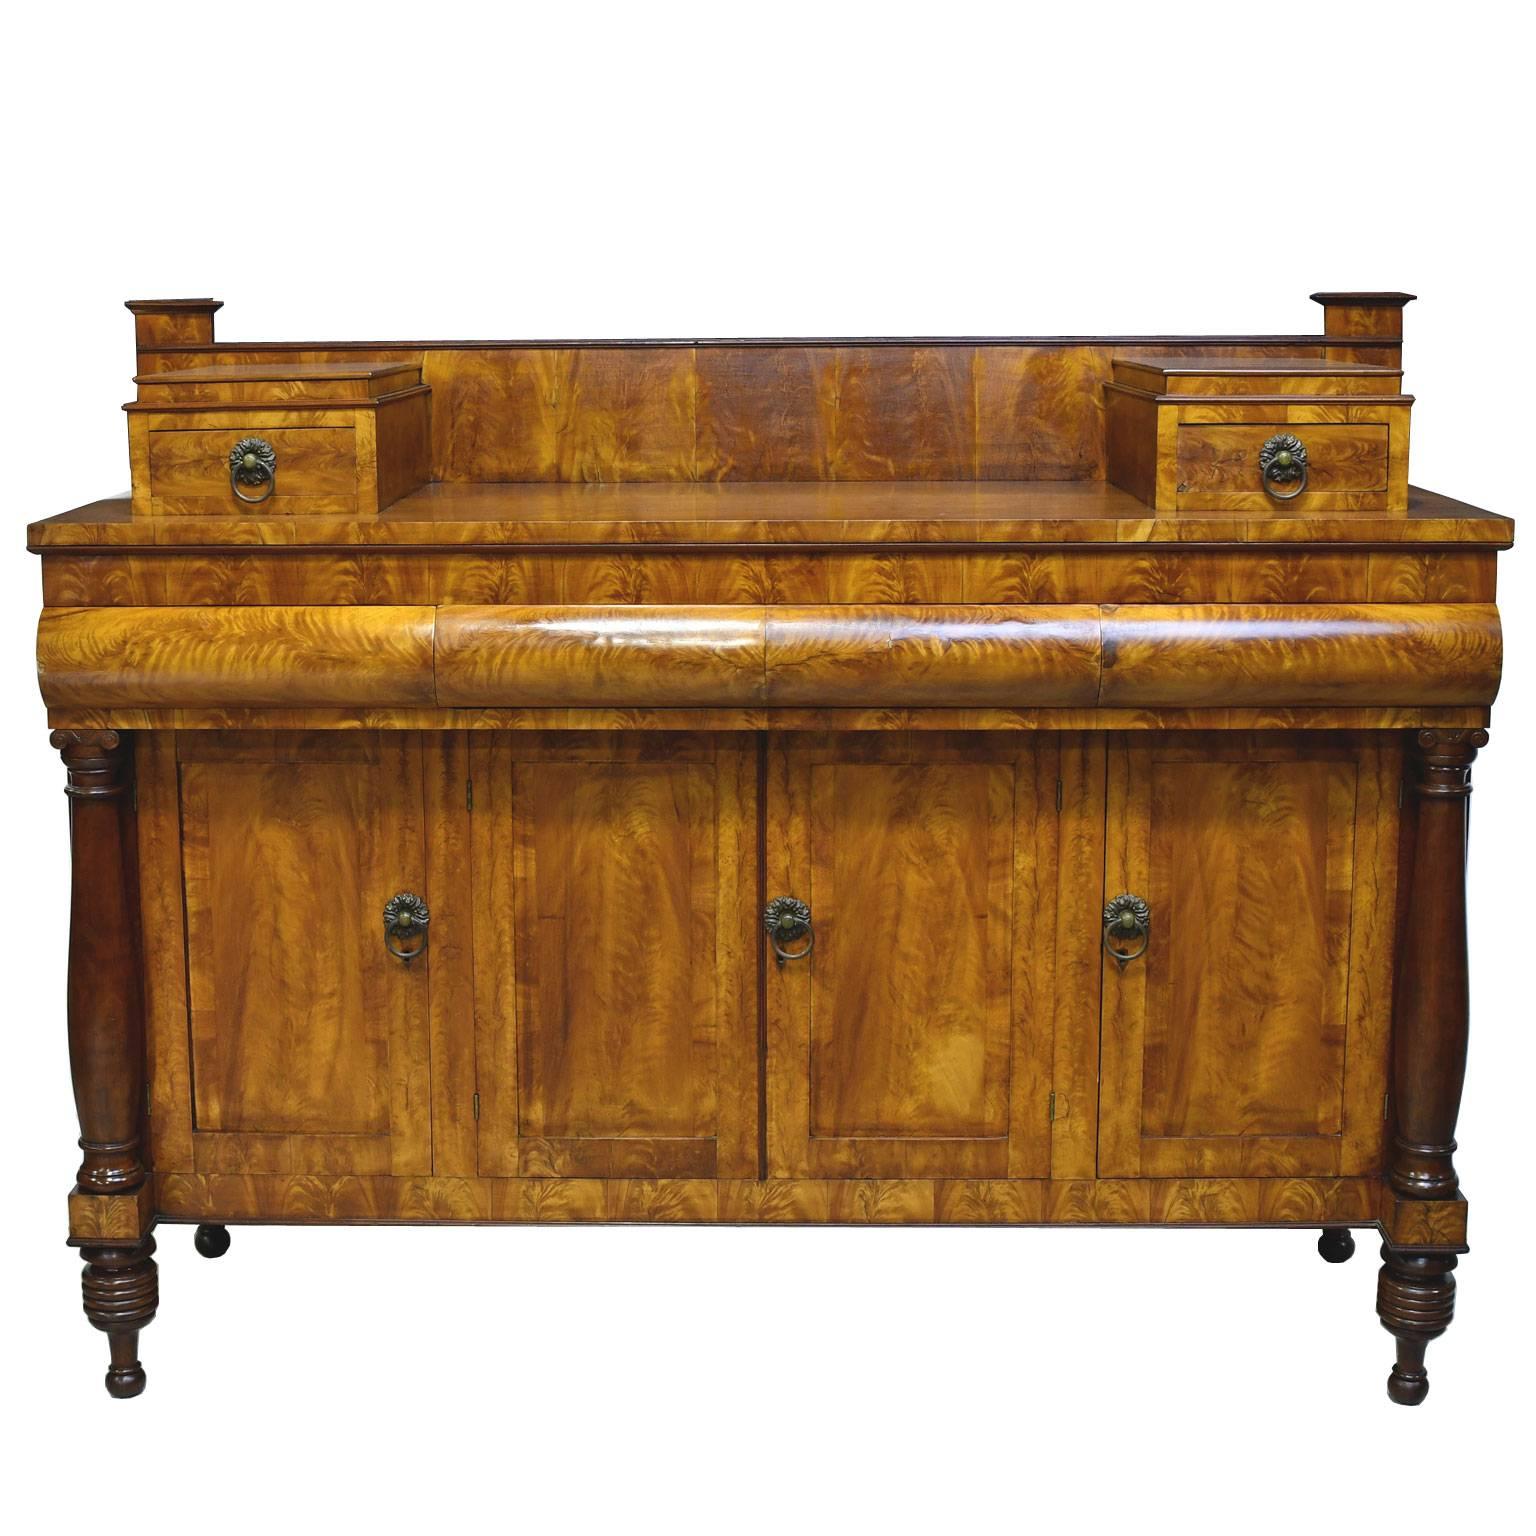 A handsome American Empire sideboard in fine satinwood with two small top drawers and a backsplash over a base with three convex drawers above four cabinet doors that are flanked at each end by a turned column. Base rests on ring-turned feet.